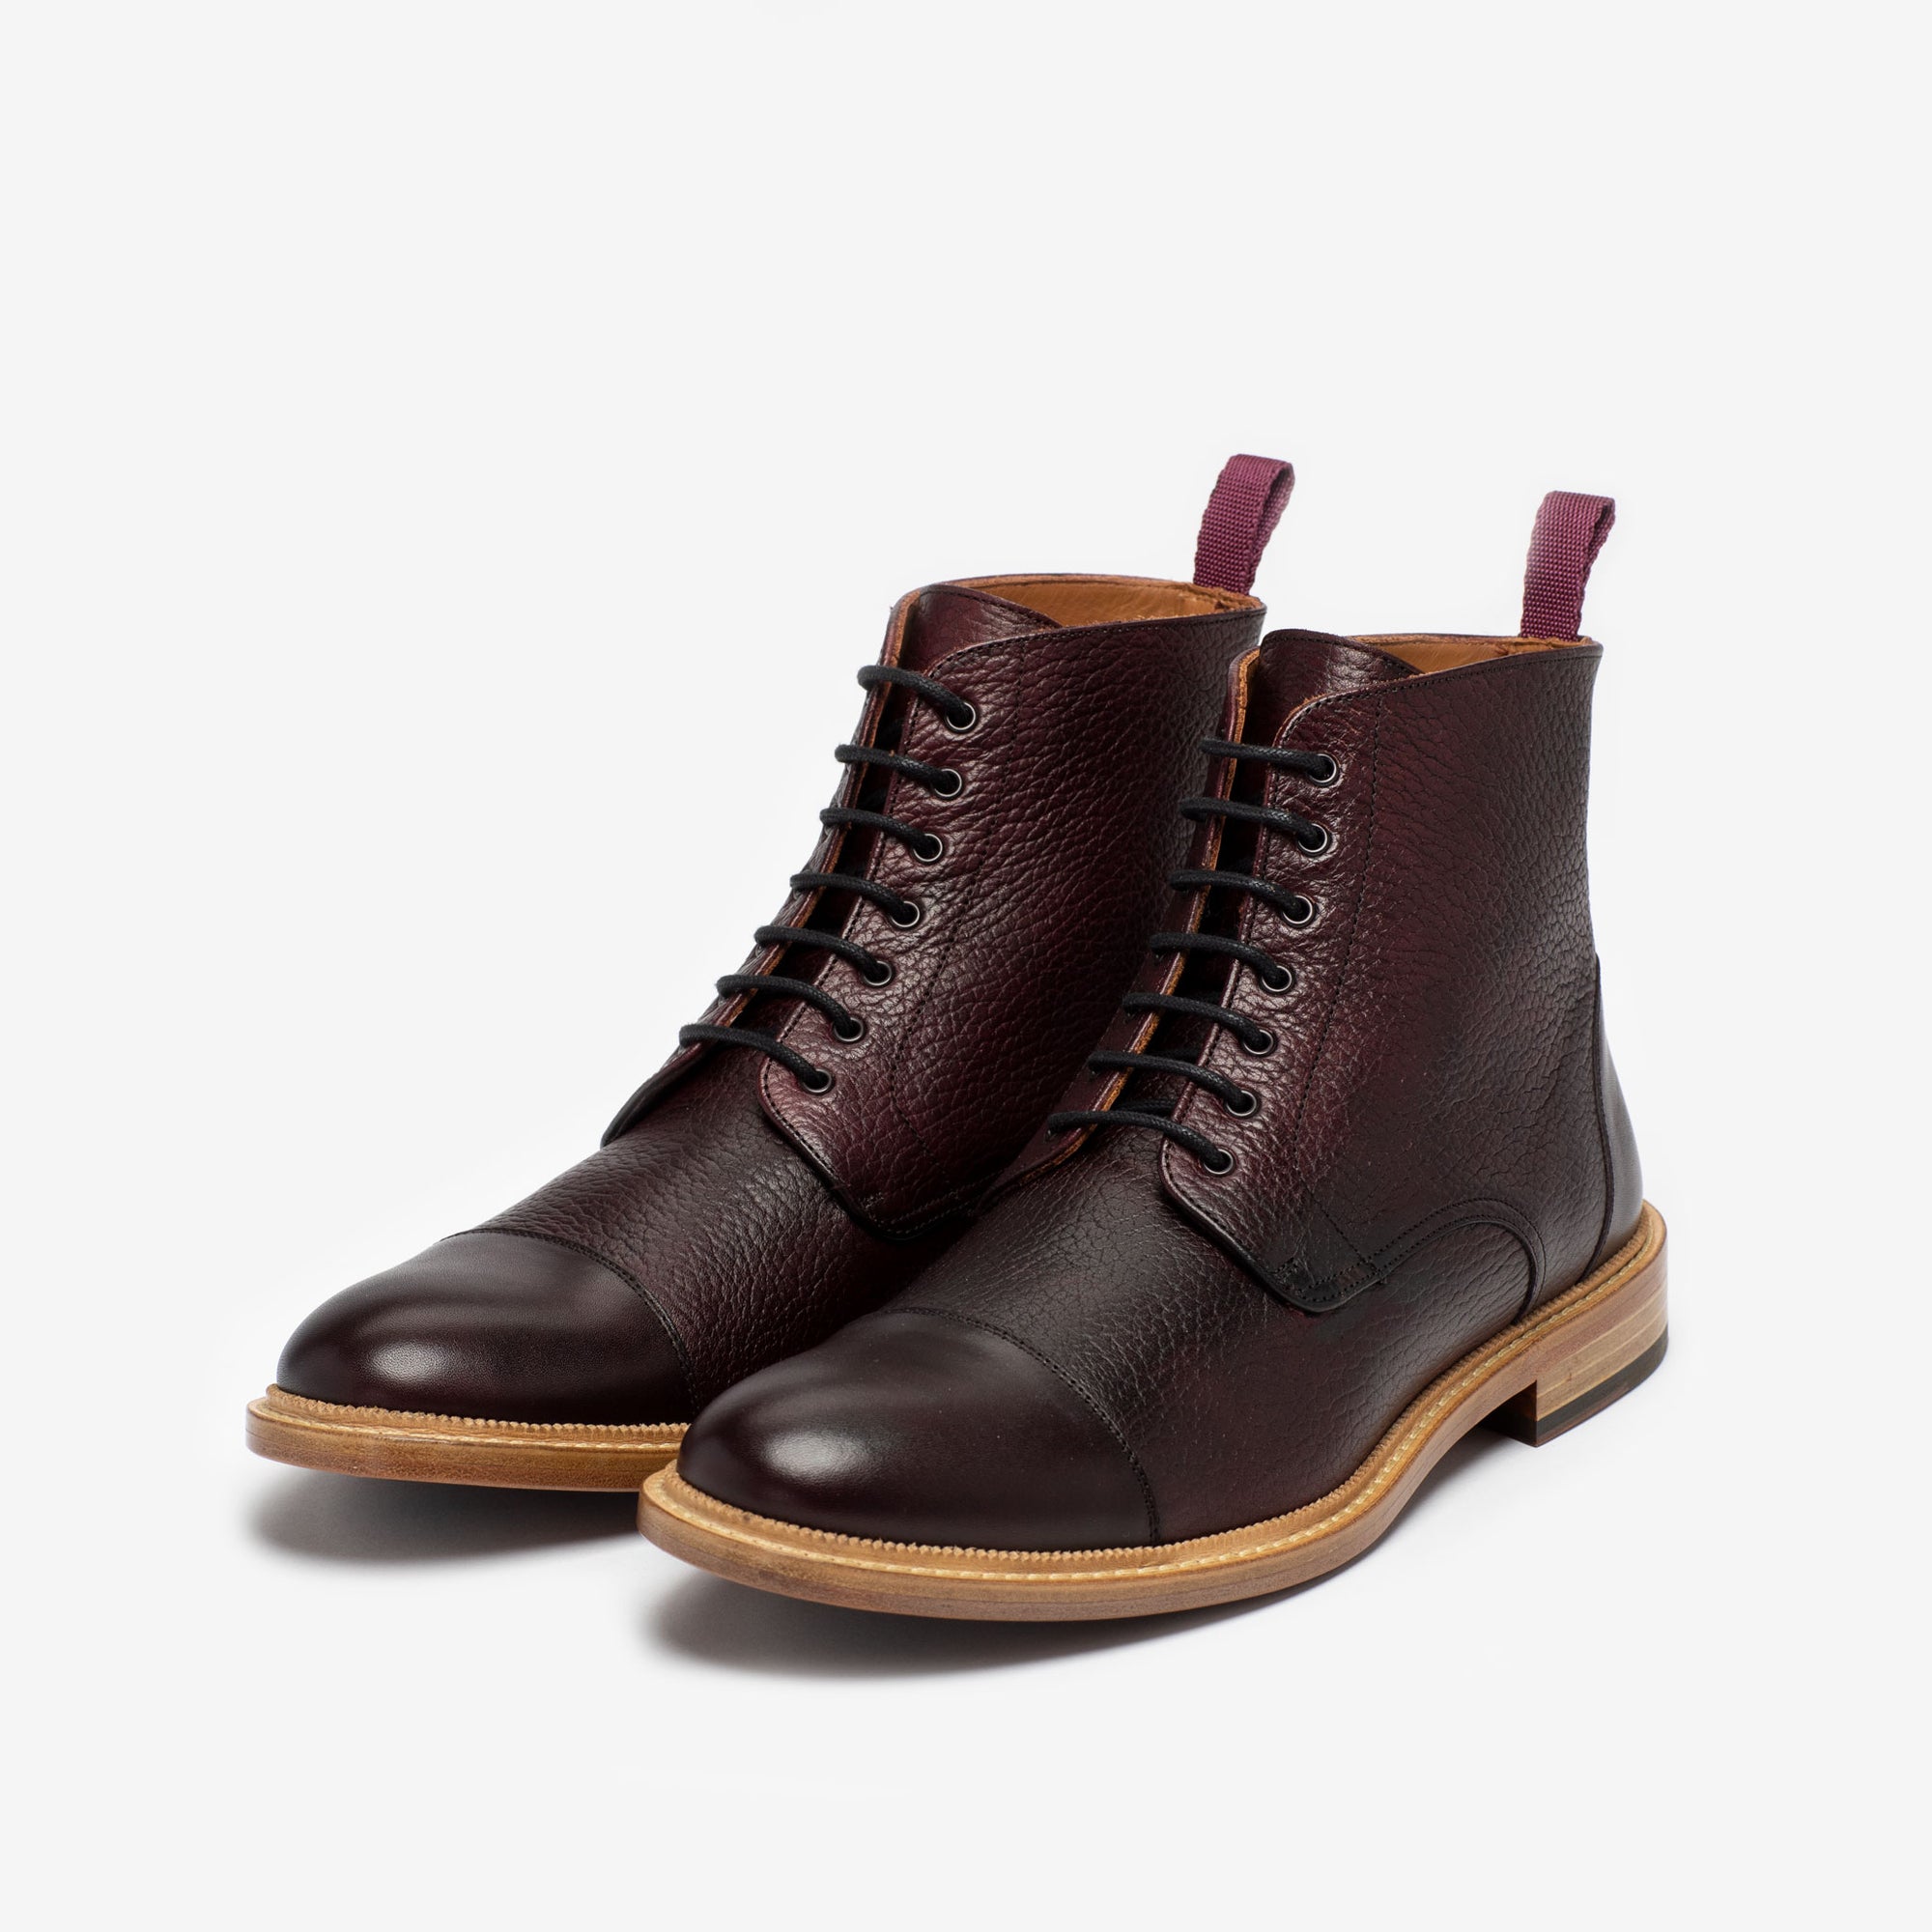 The Rome Boot in Oxblood side {{rollover}}